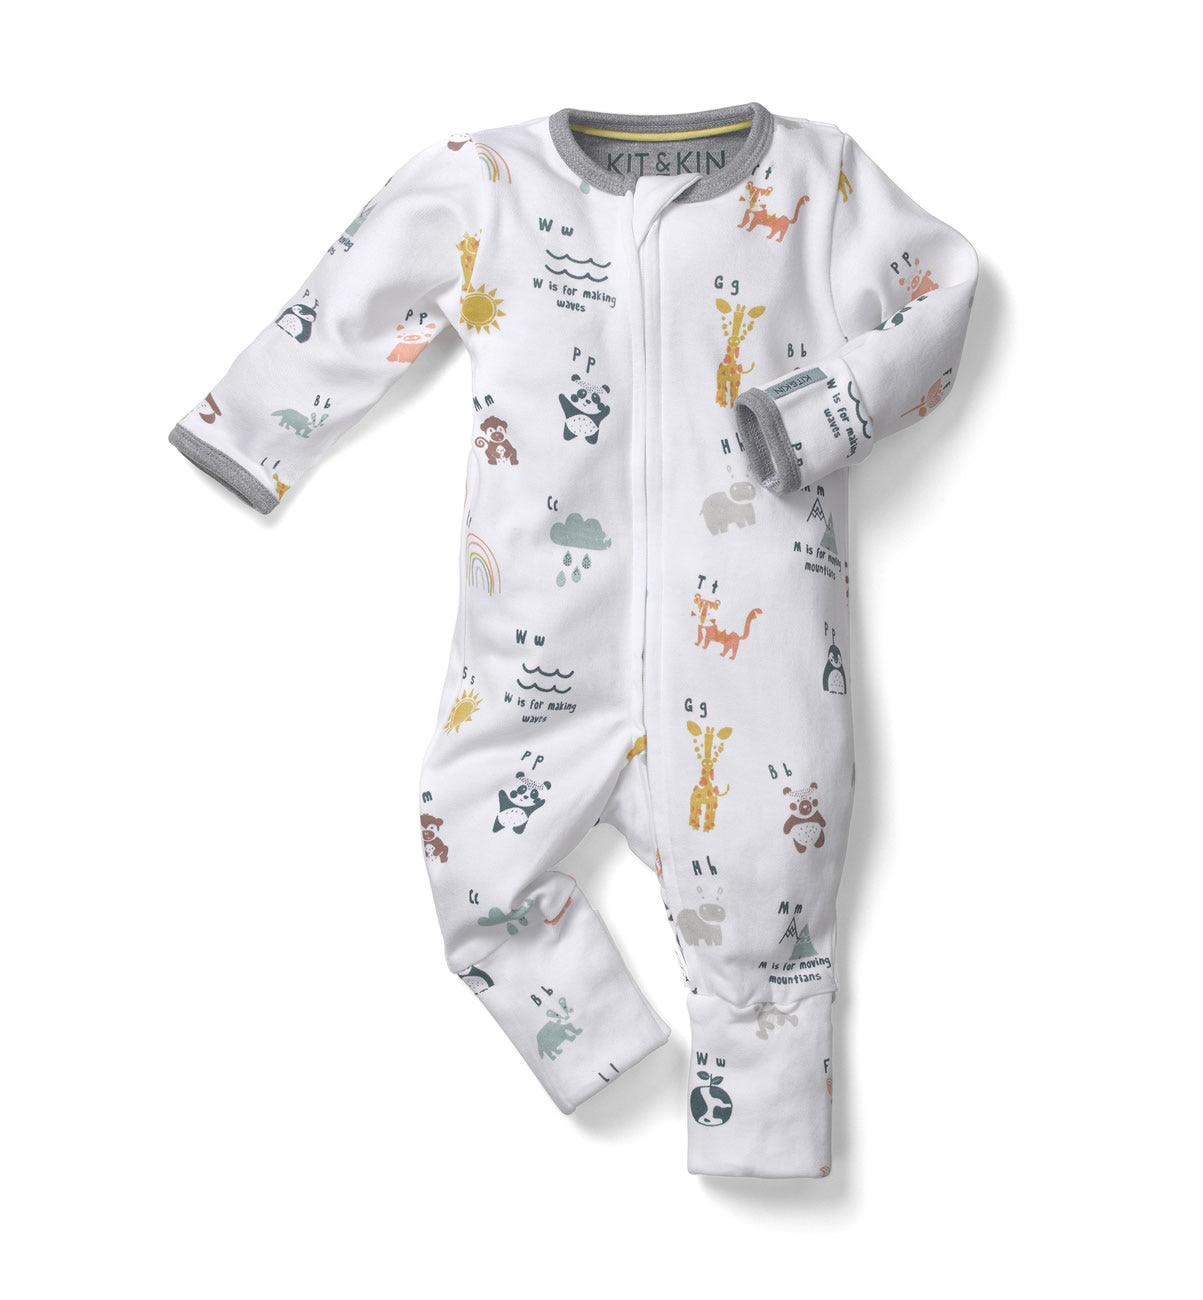 All-in-one durable onesie 0 to 3 months